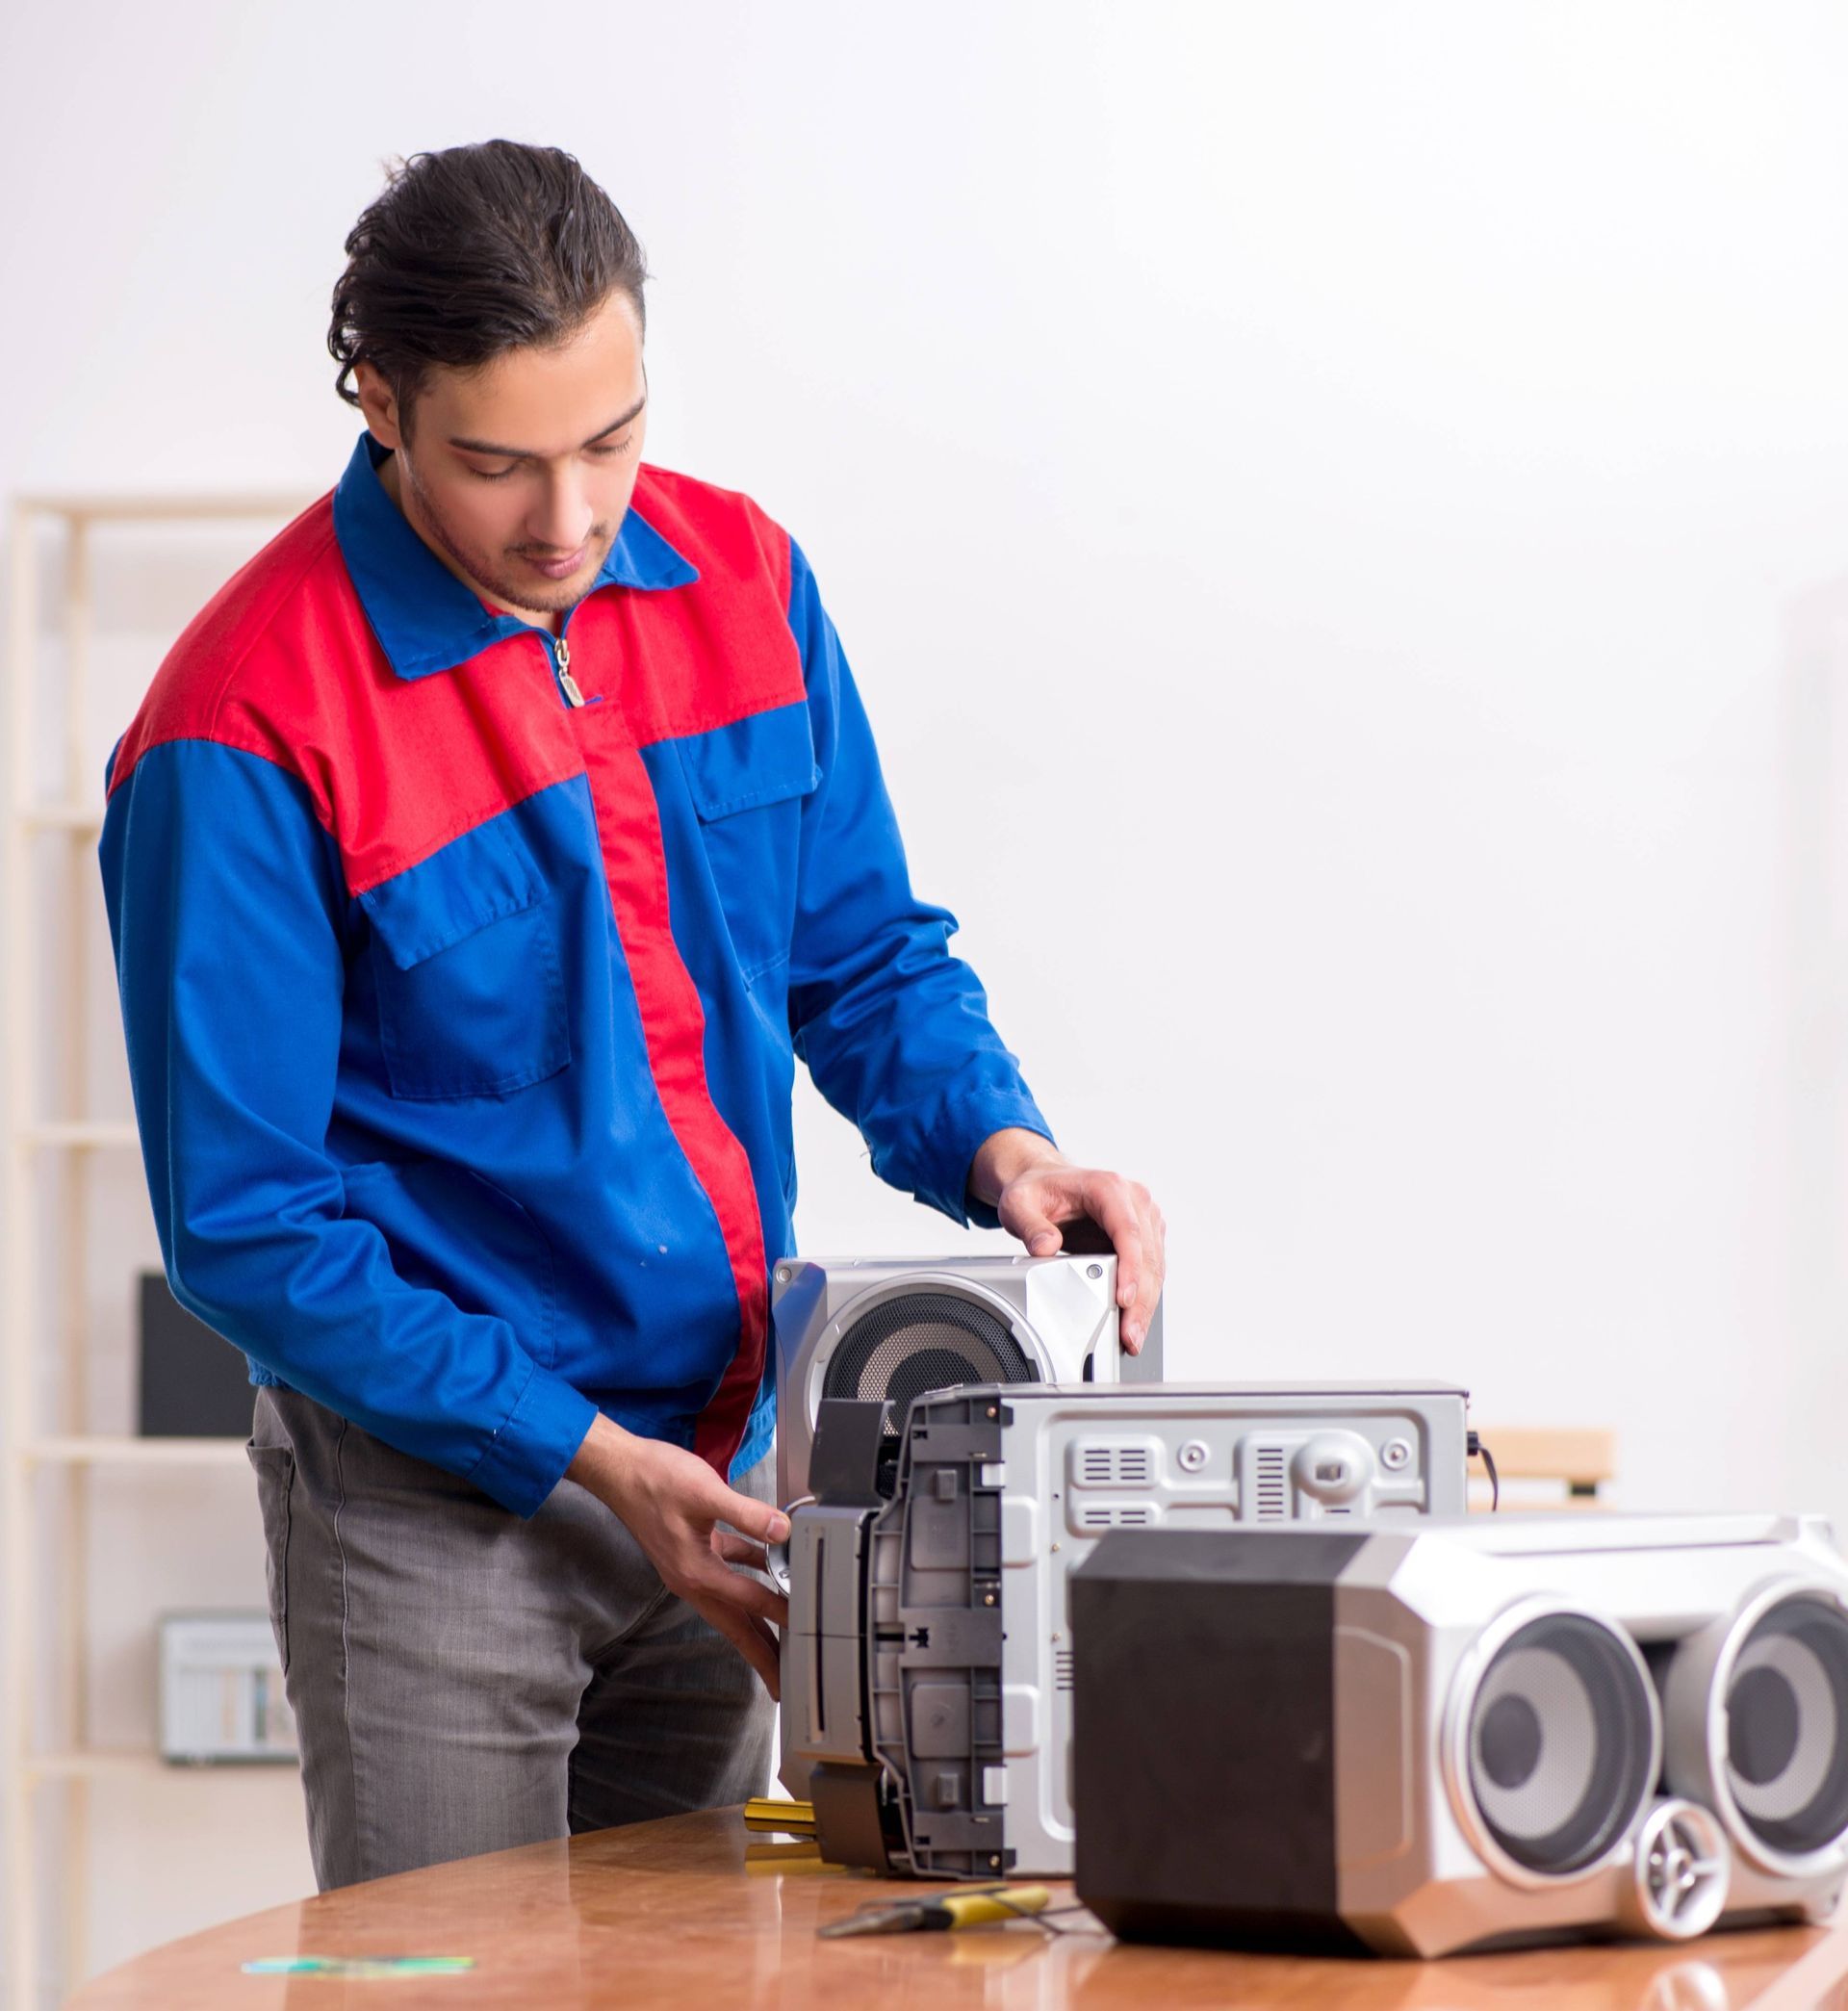 a man in a blue and red jacket is working on a stereo system